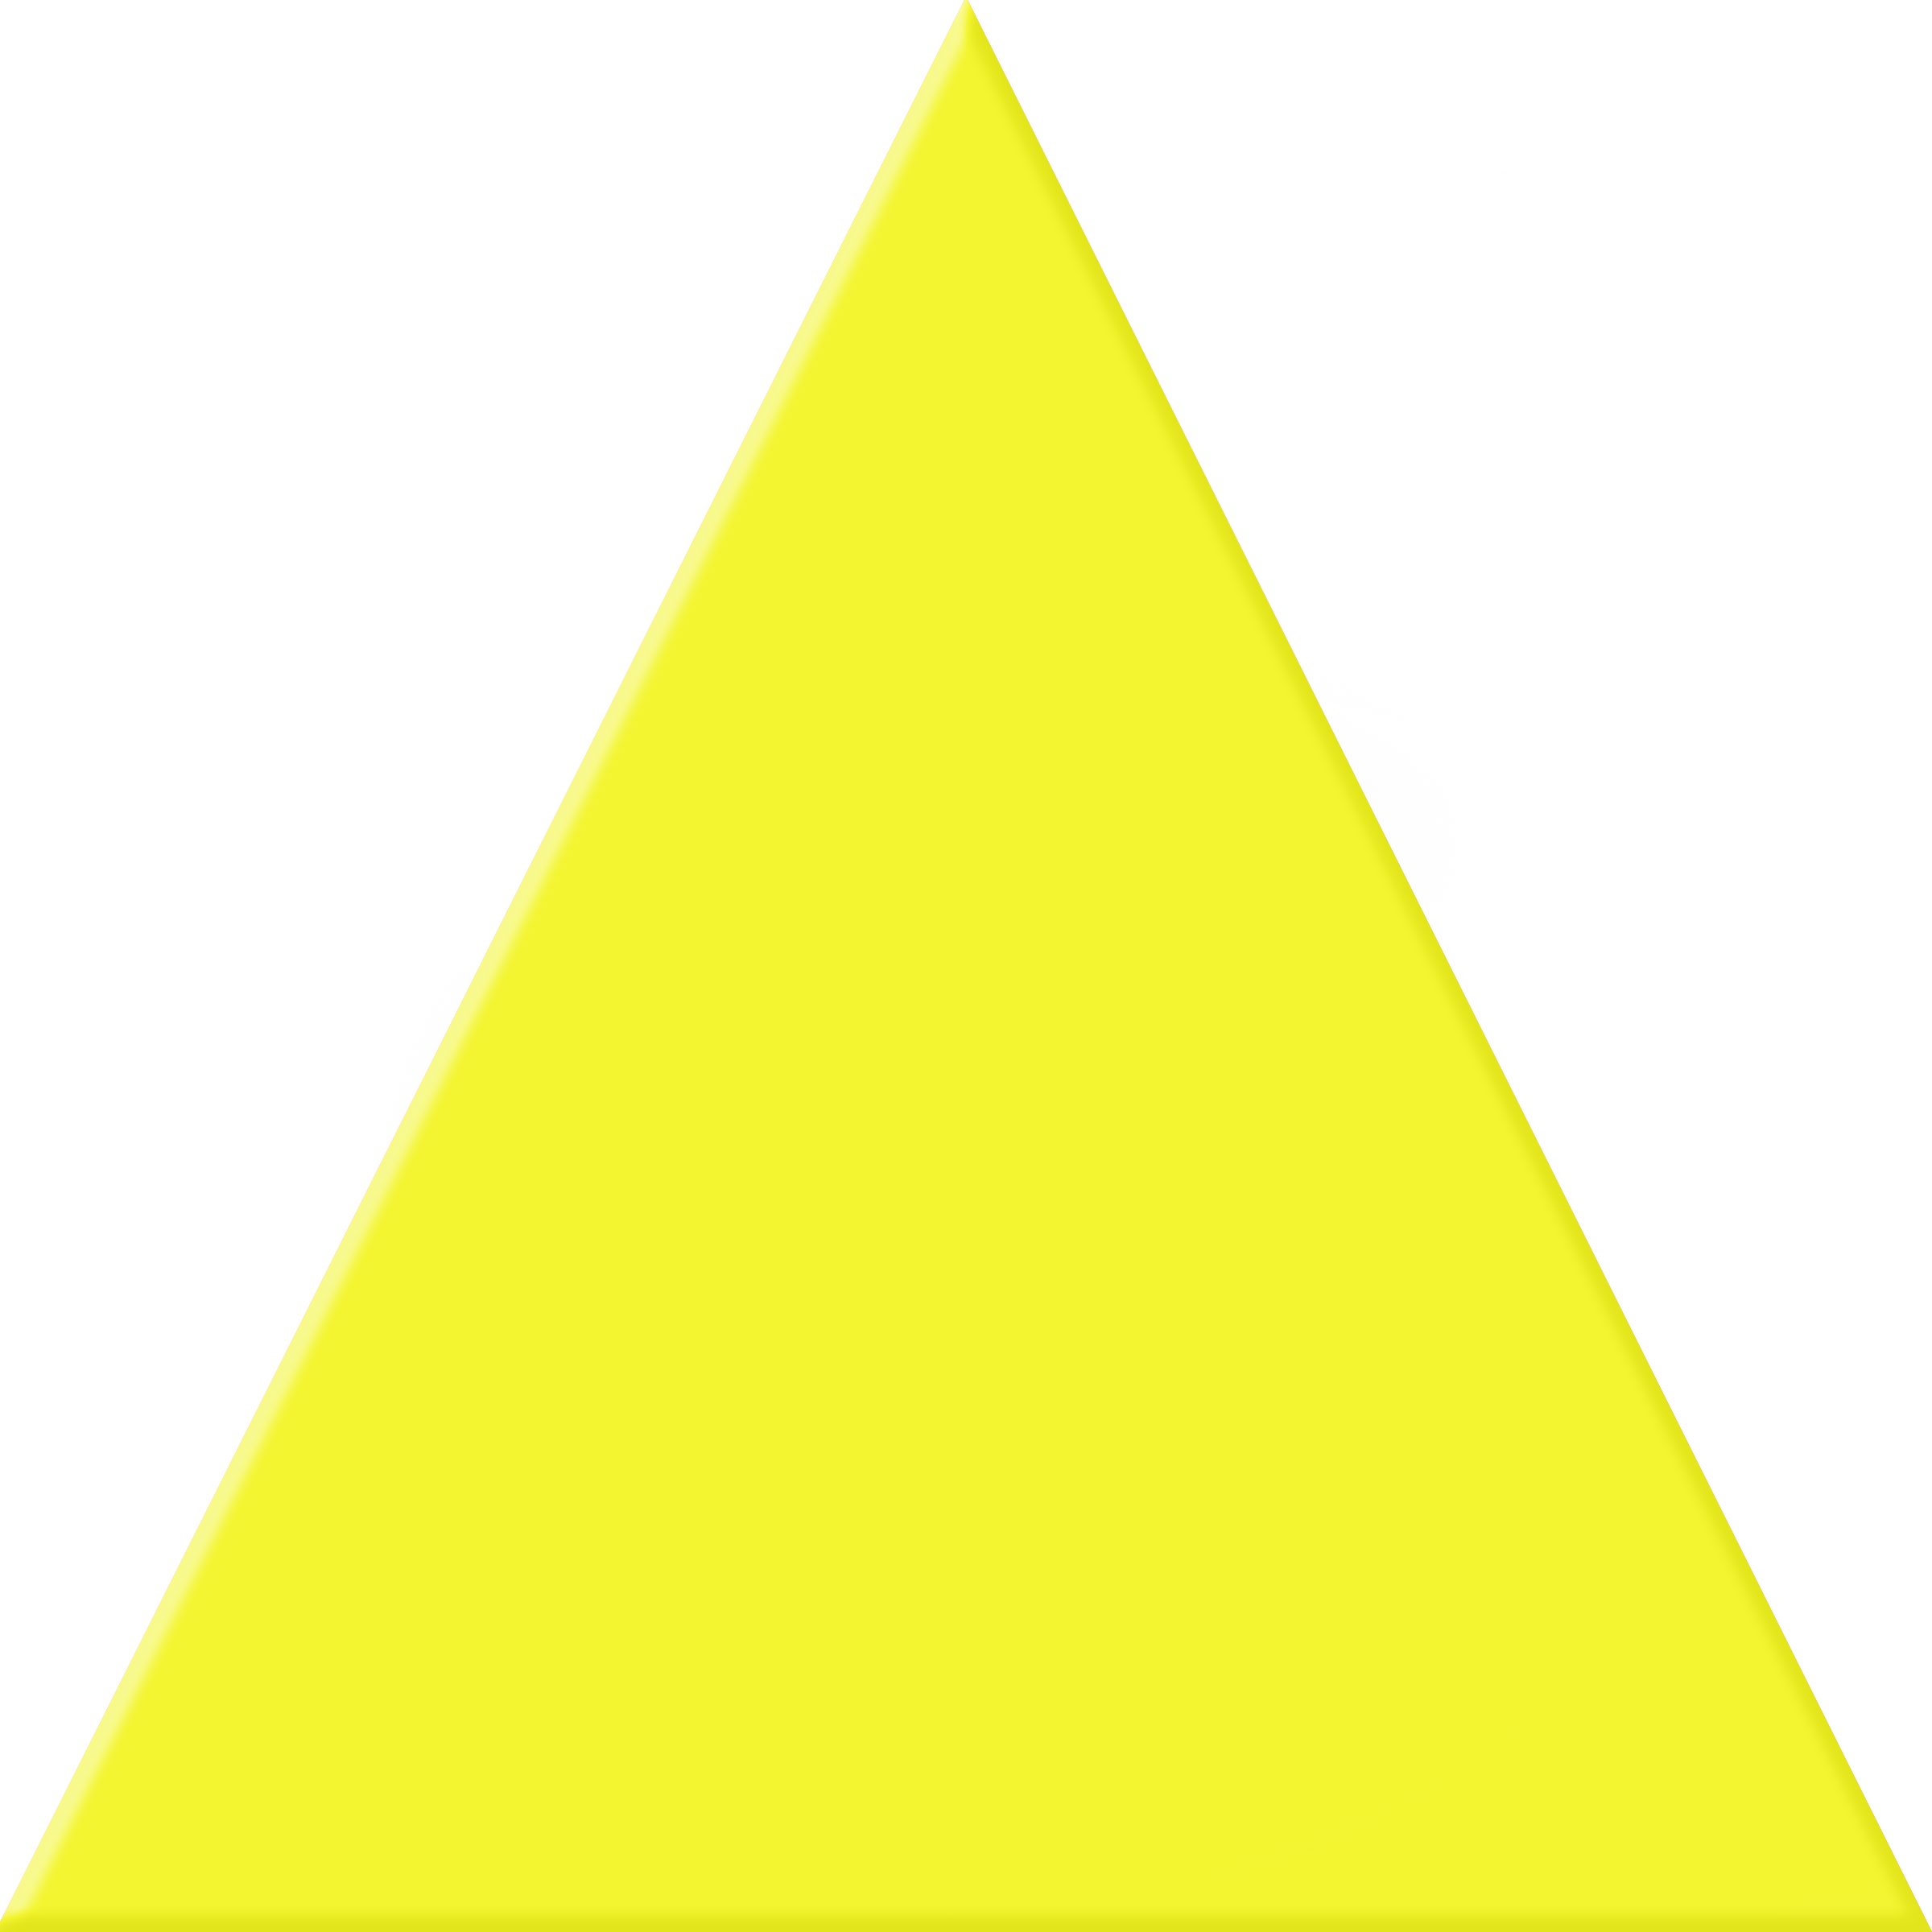 Yellow triangle image transparent png #42405 - Free Icons and PNG